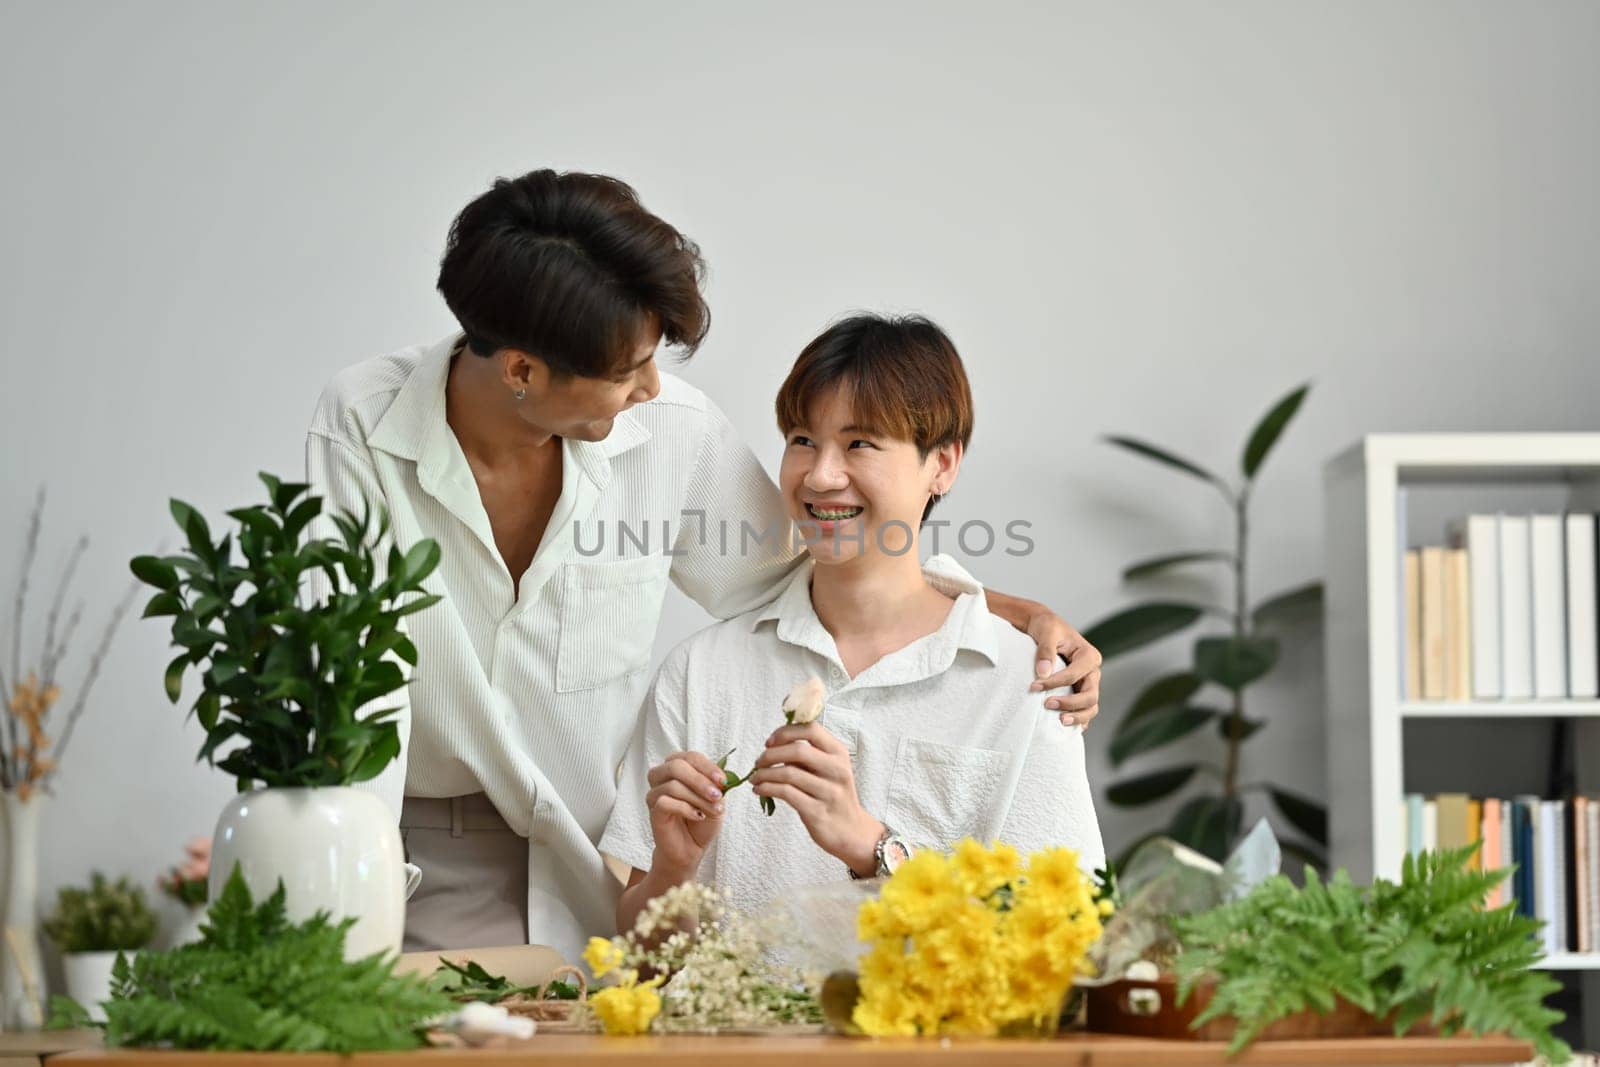 LGBT, love moments and lifestyle concept. Affectionate male gay couple spending time together, enjoying arranging flowers in cozy home by prathanchorruangsak